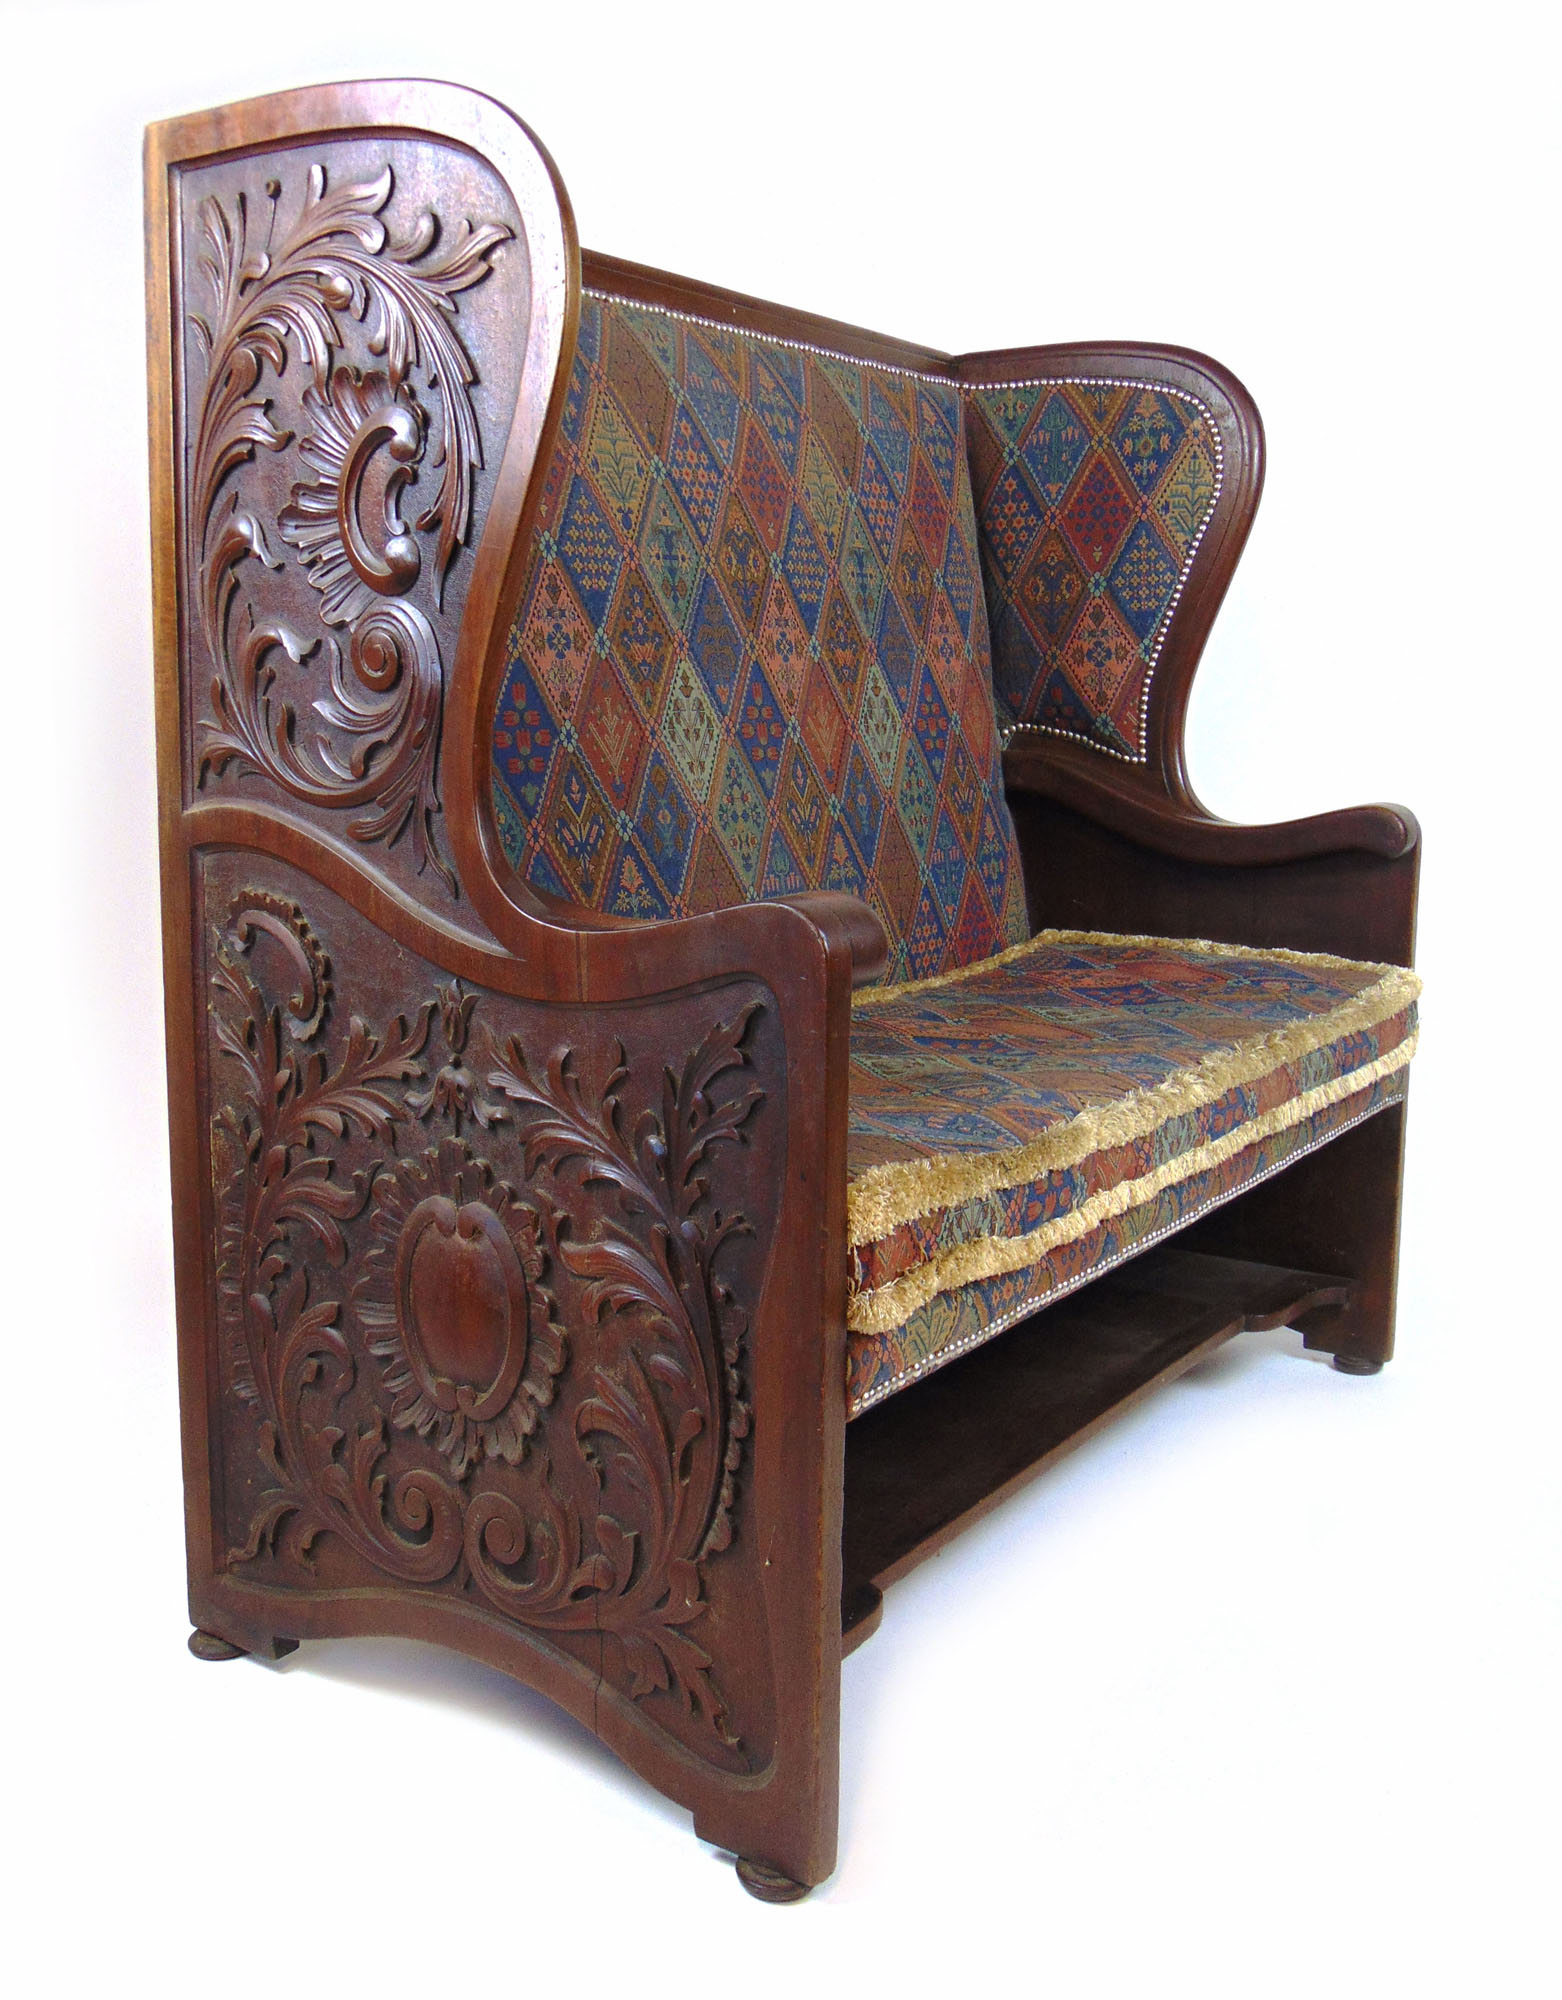 A late 19th century walnut settle with floral carved sides upholstered in a patterned fabric, h. - Image 2 of 3